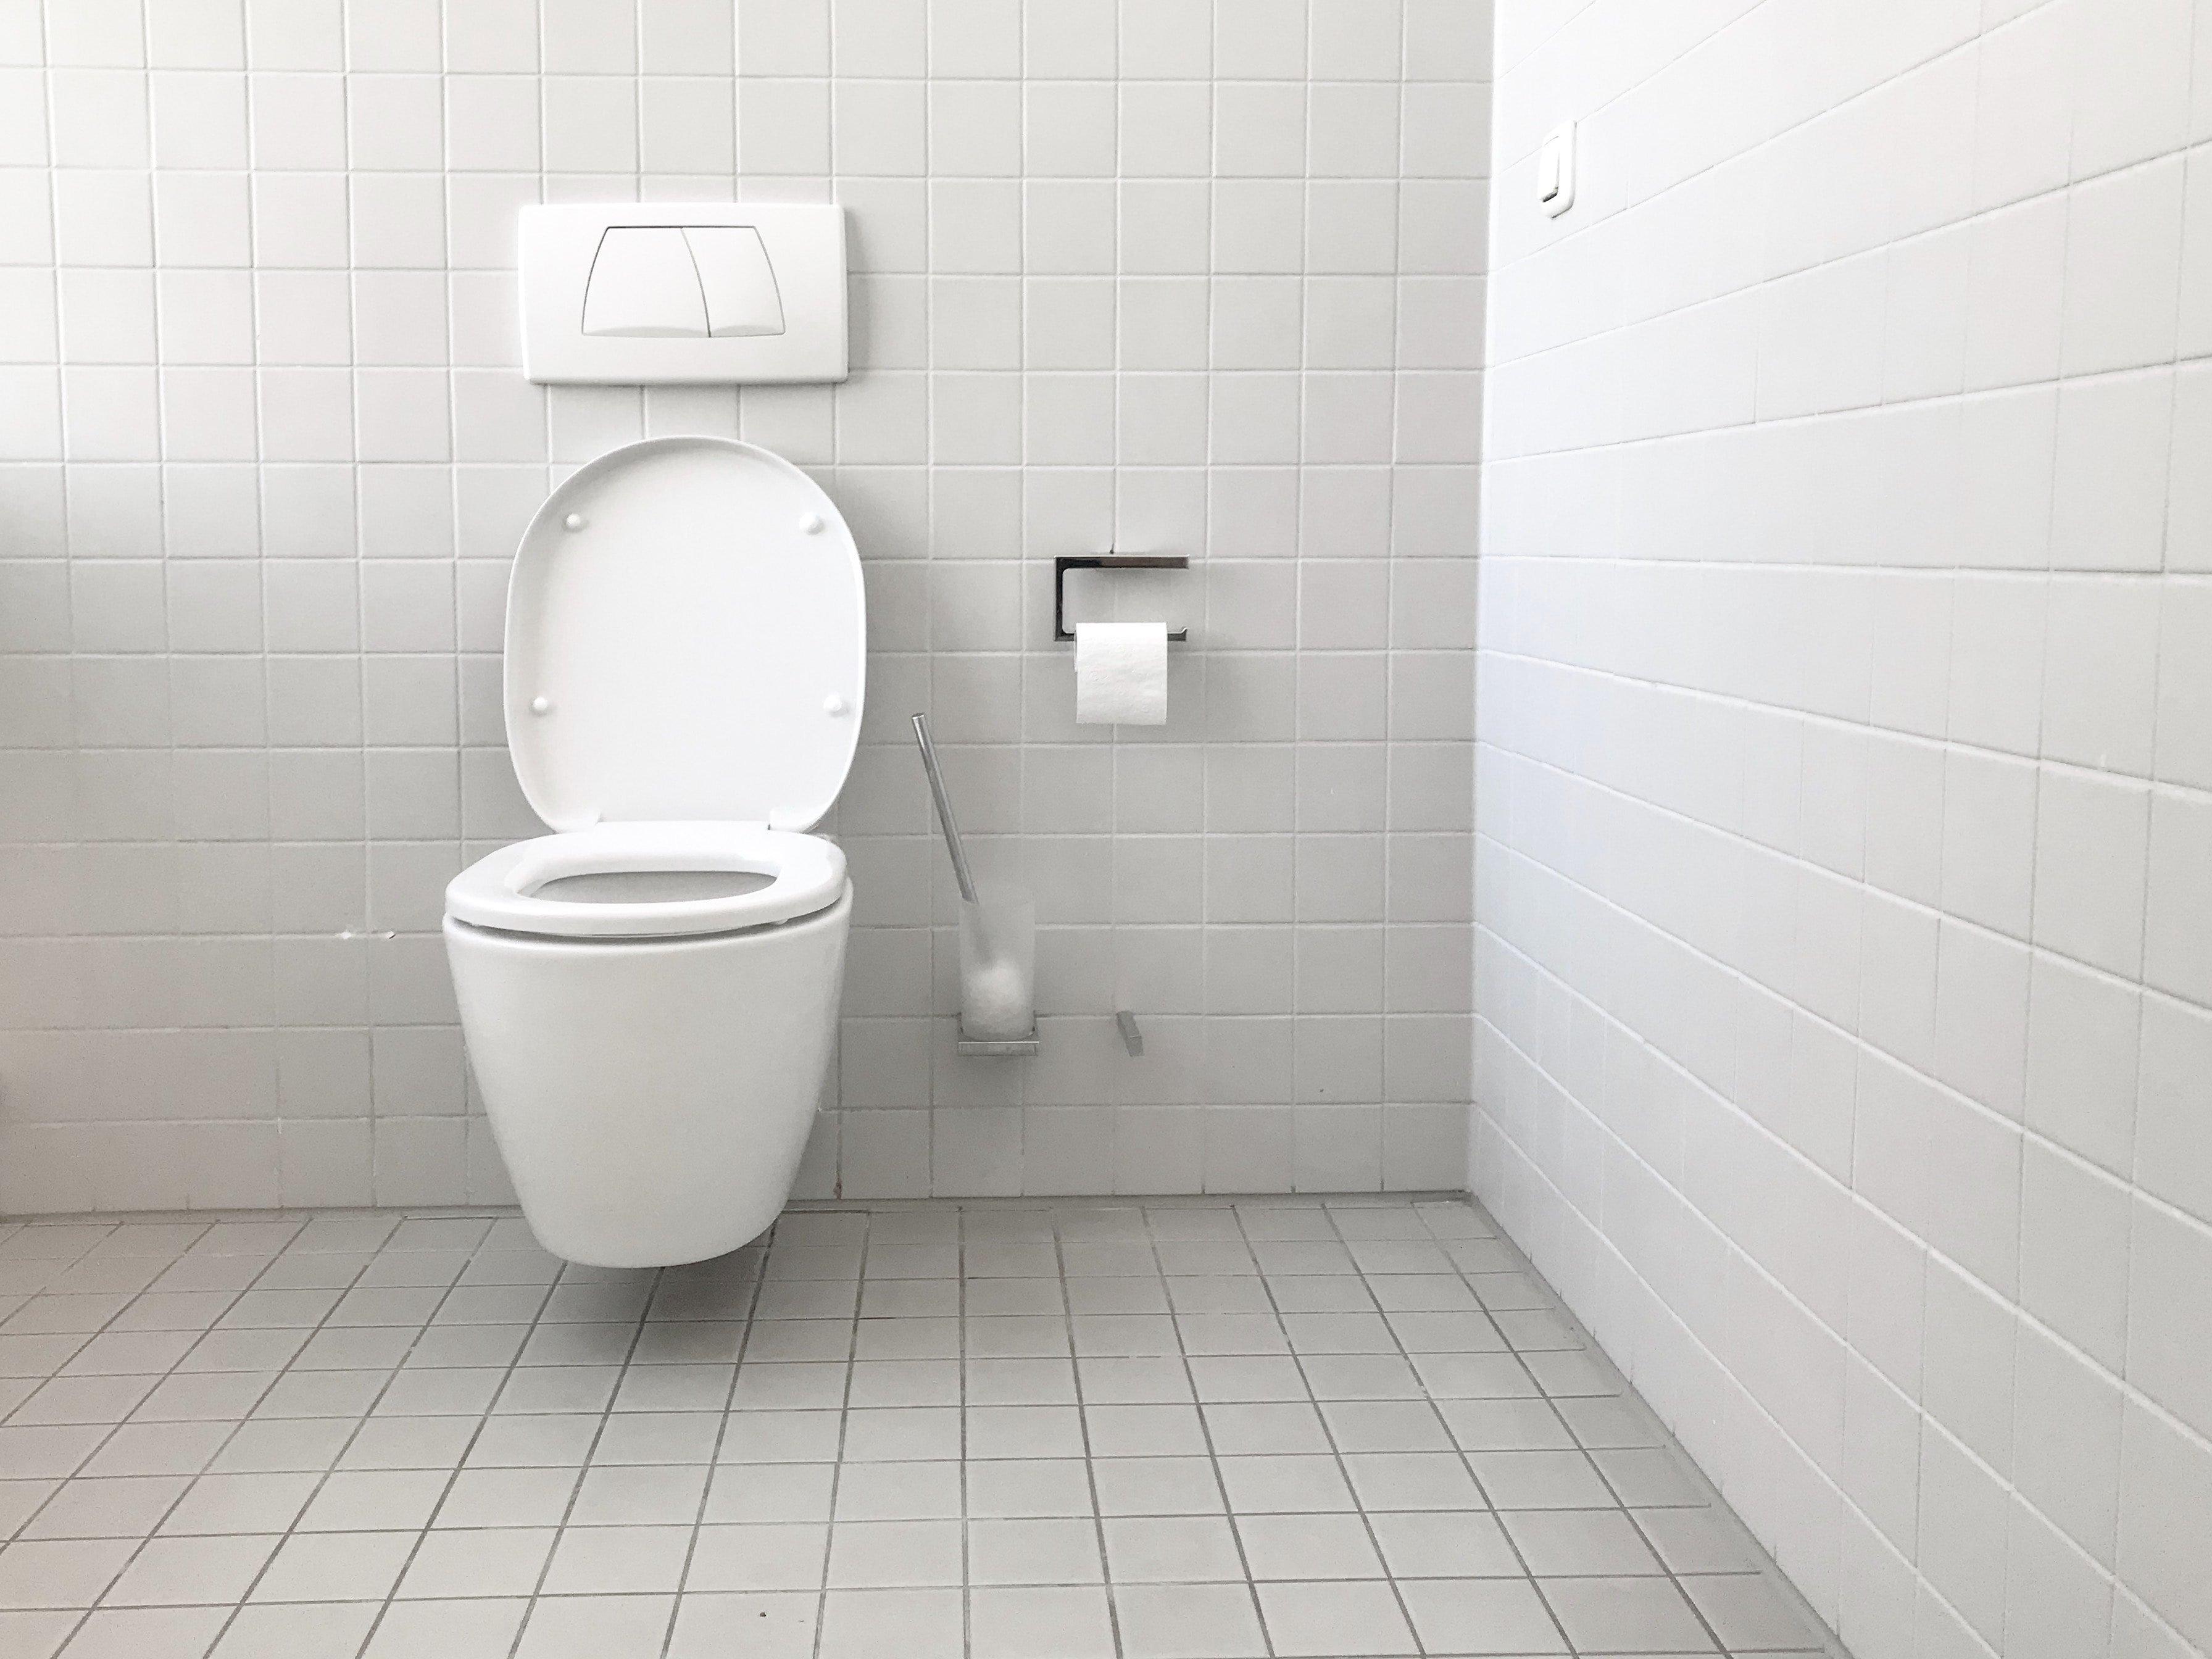 Tips to Choose an Ecological Toilet with the Right Fit and Flush